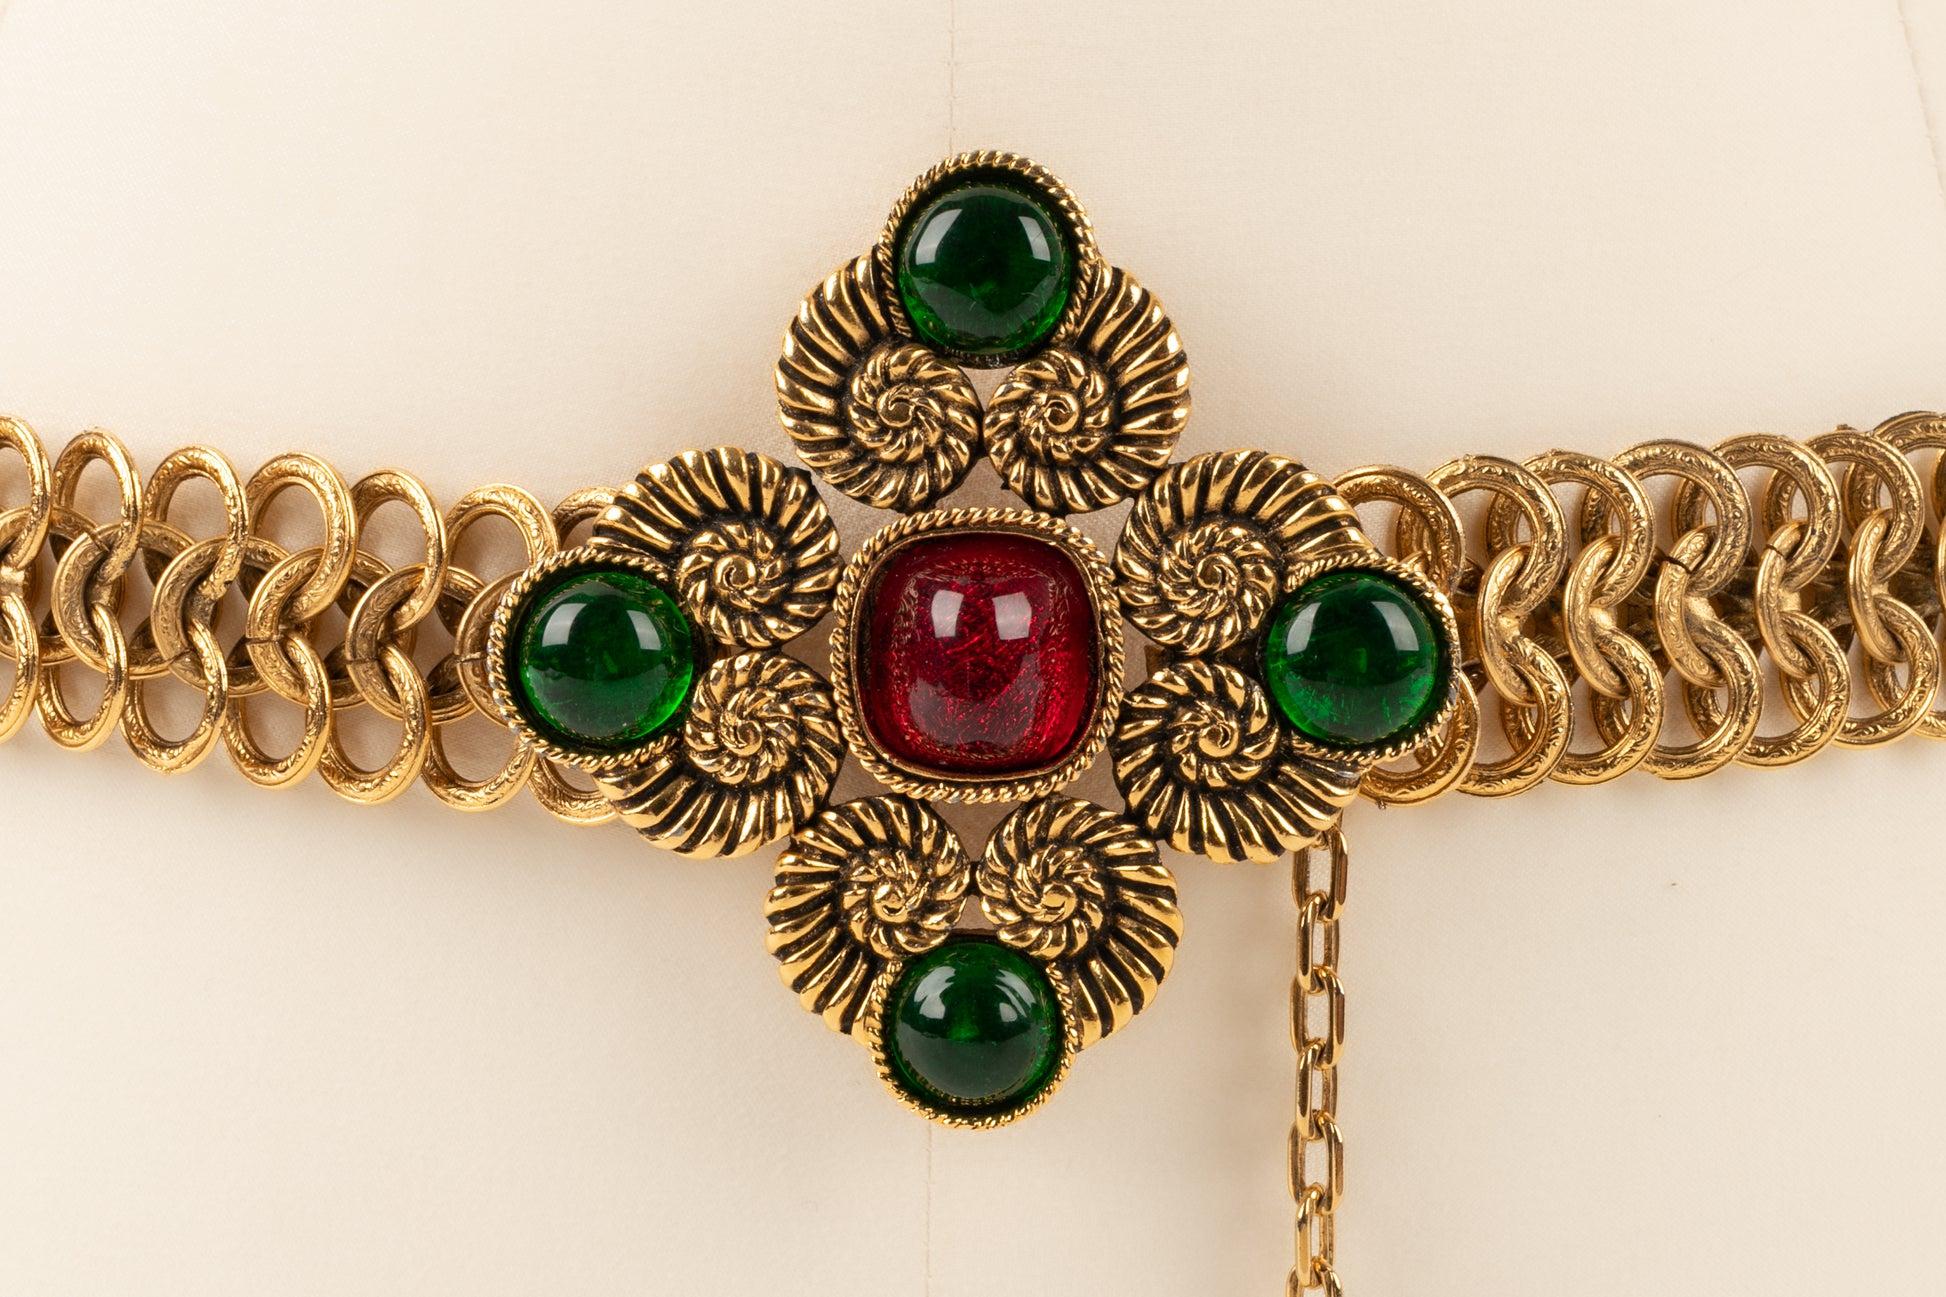 Chanel - (Made in France) Golden metal belt with green and red glass paste. 1985 Collection.

Additional information:
Condition: Very good condition
Dimensions: Length: from 84 cm to 90 cm
Period: 20th Century

Seller Reference: CCB54